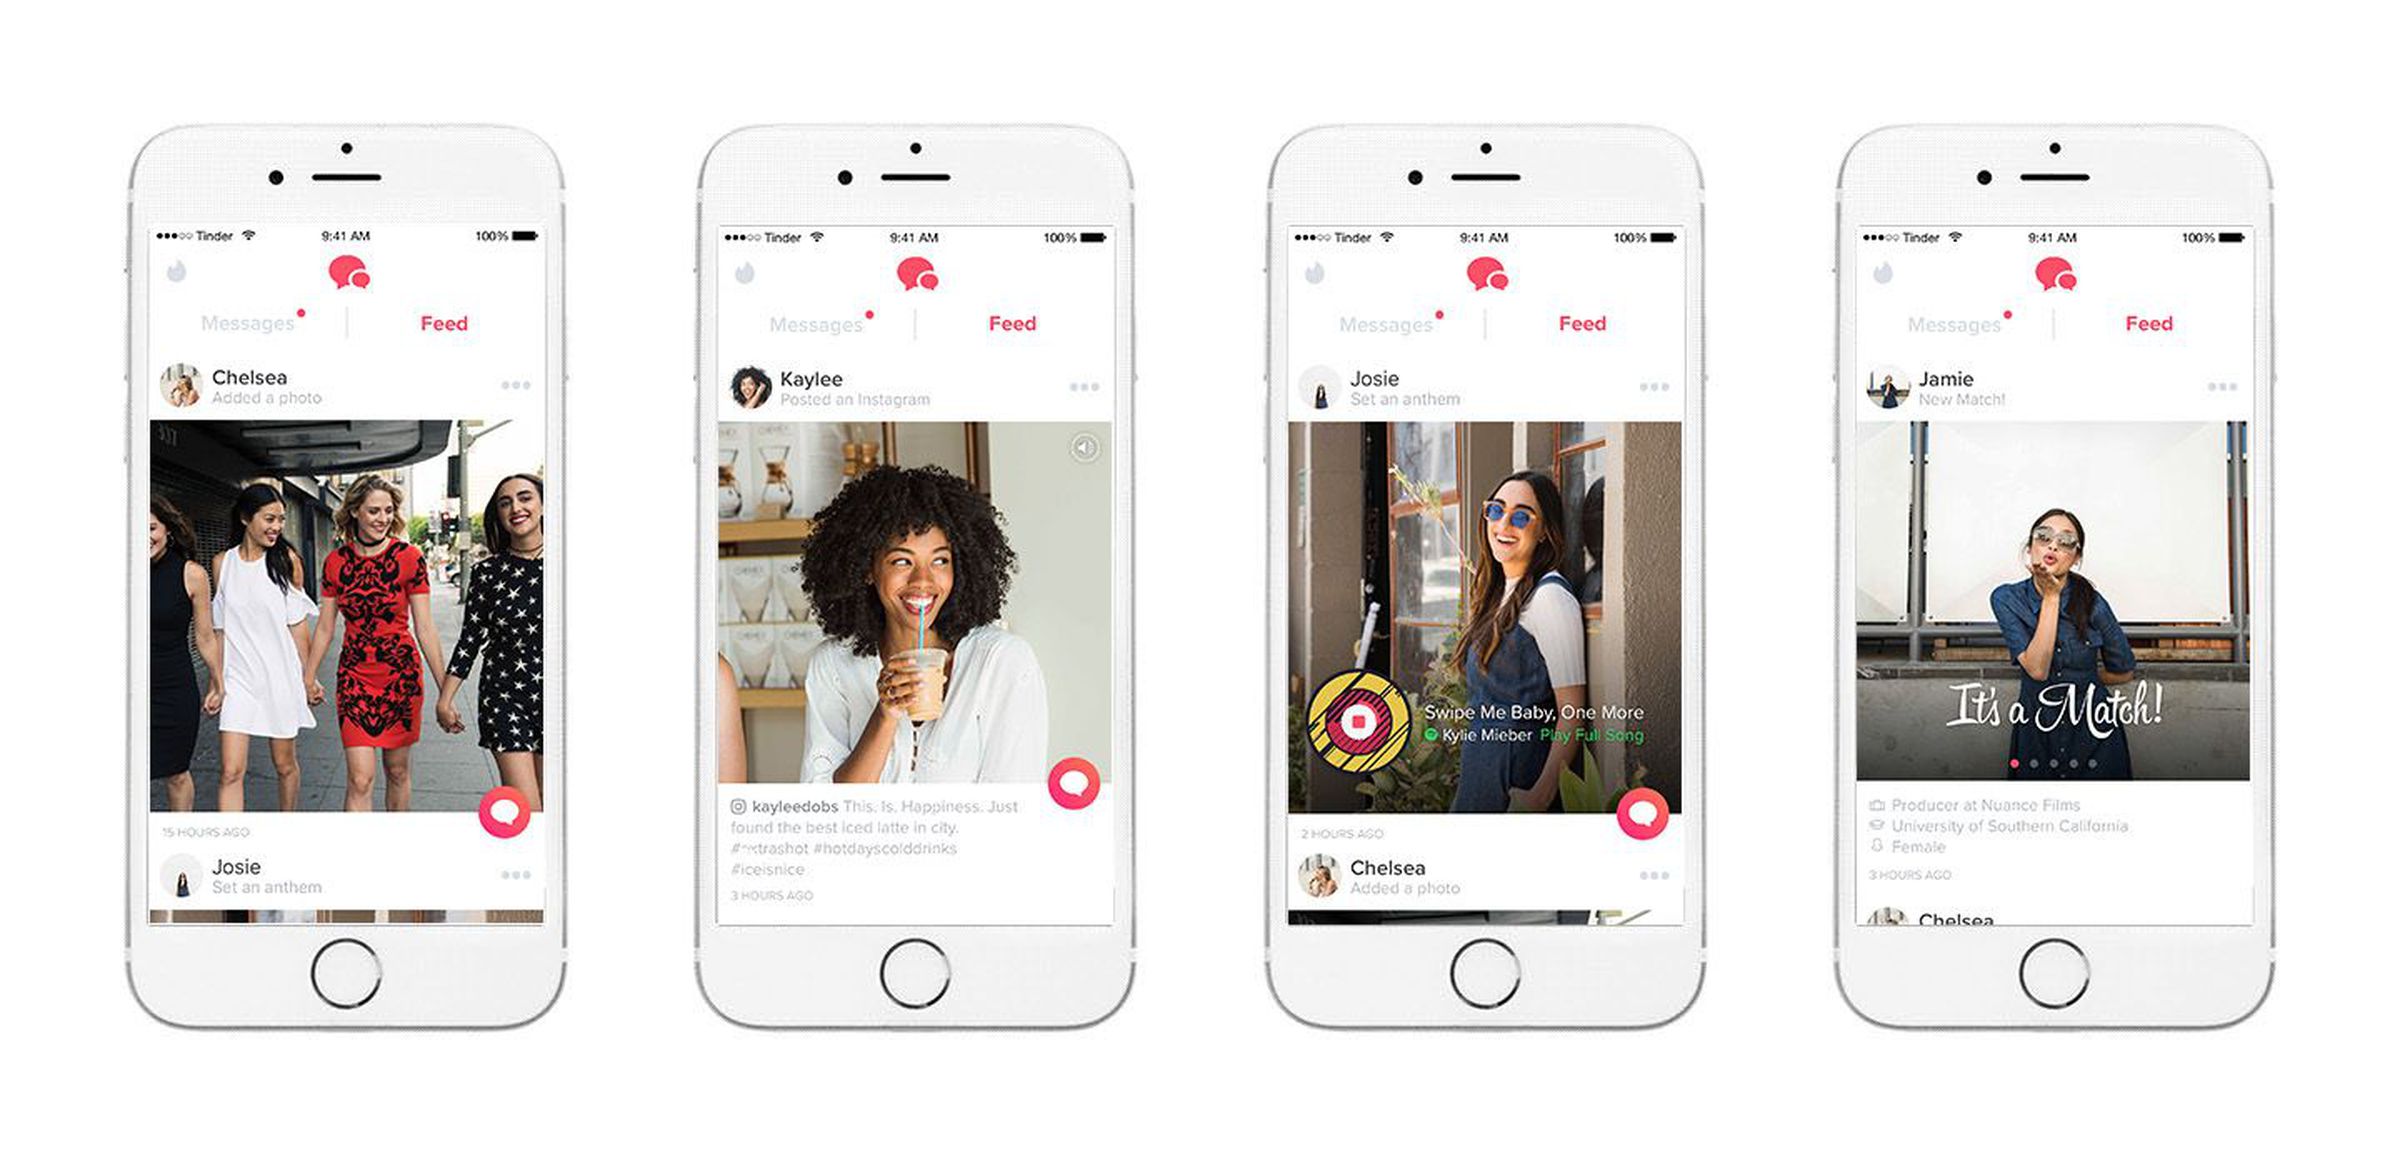 During testing, the Tinder Feed showed a match’s recent Instagram uploads. But that feature has been removed from the final version. 